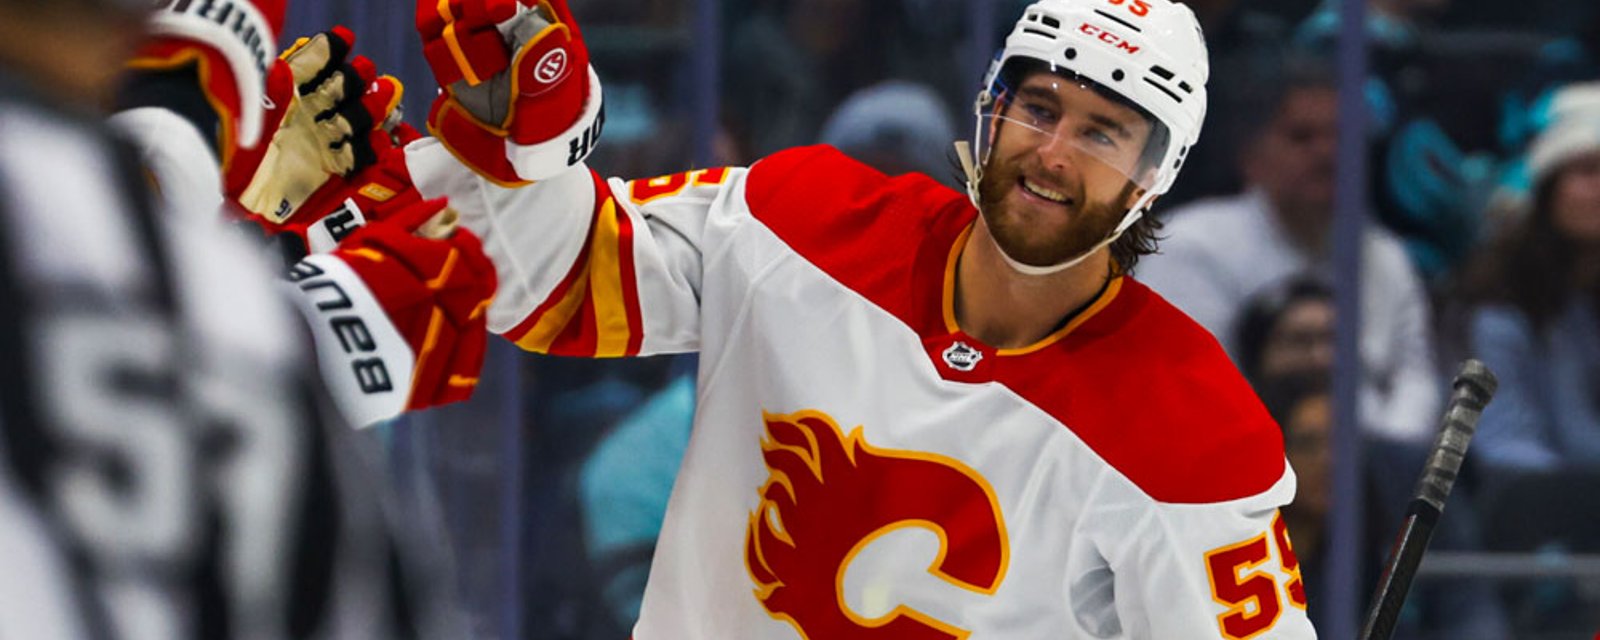 Report: Hanifin and Flames close on contract extension?